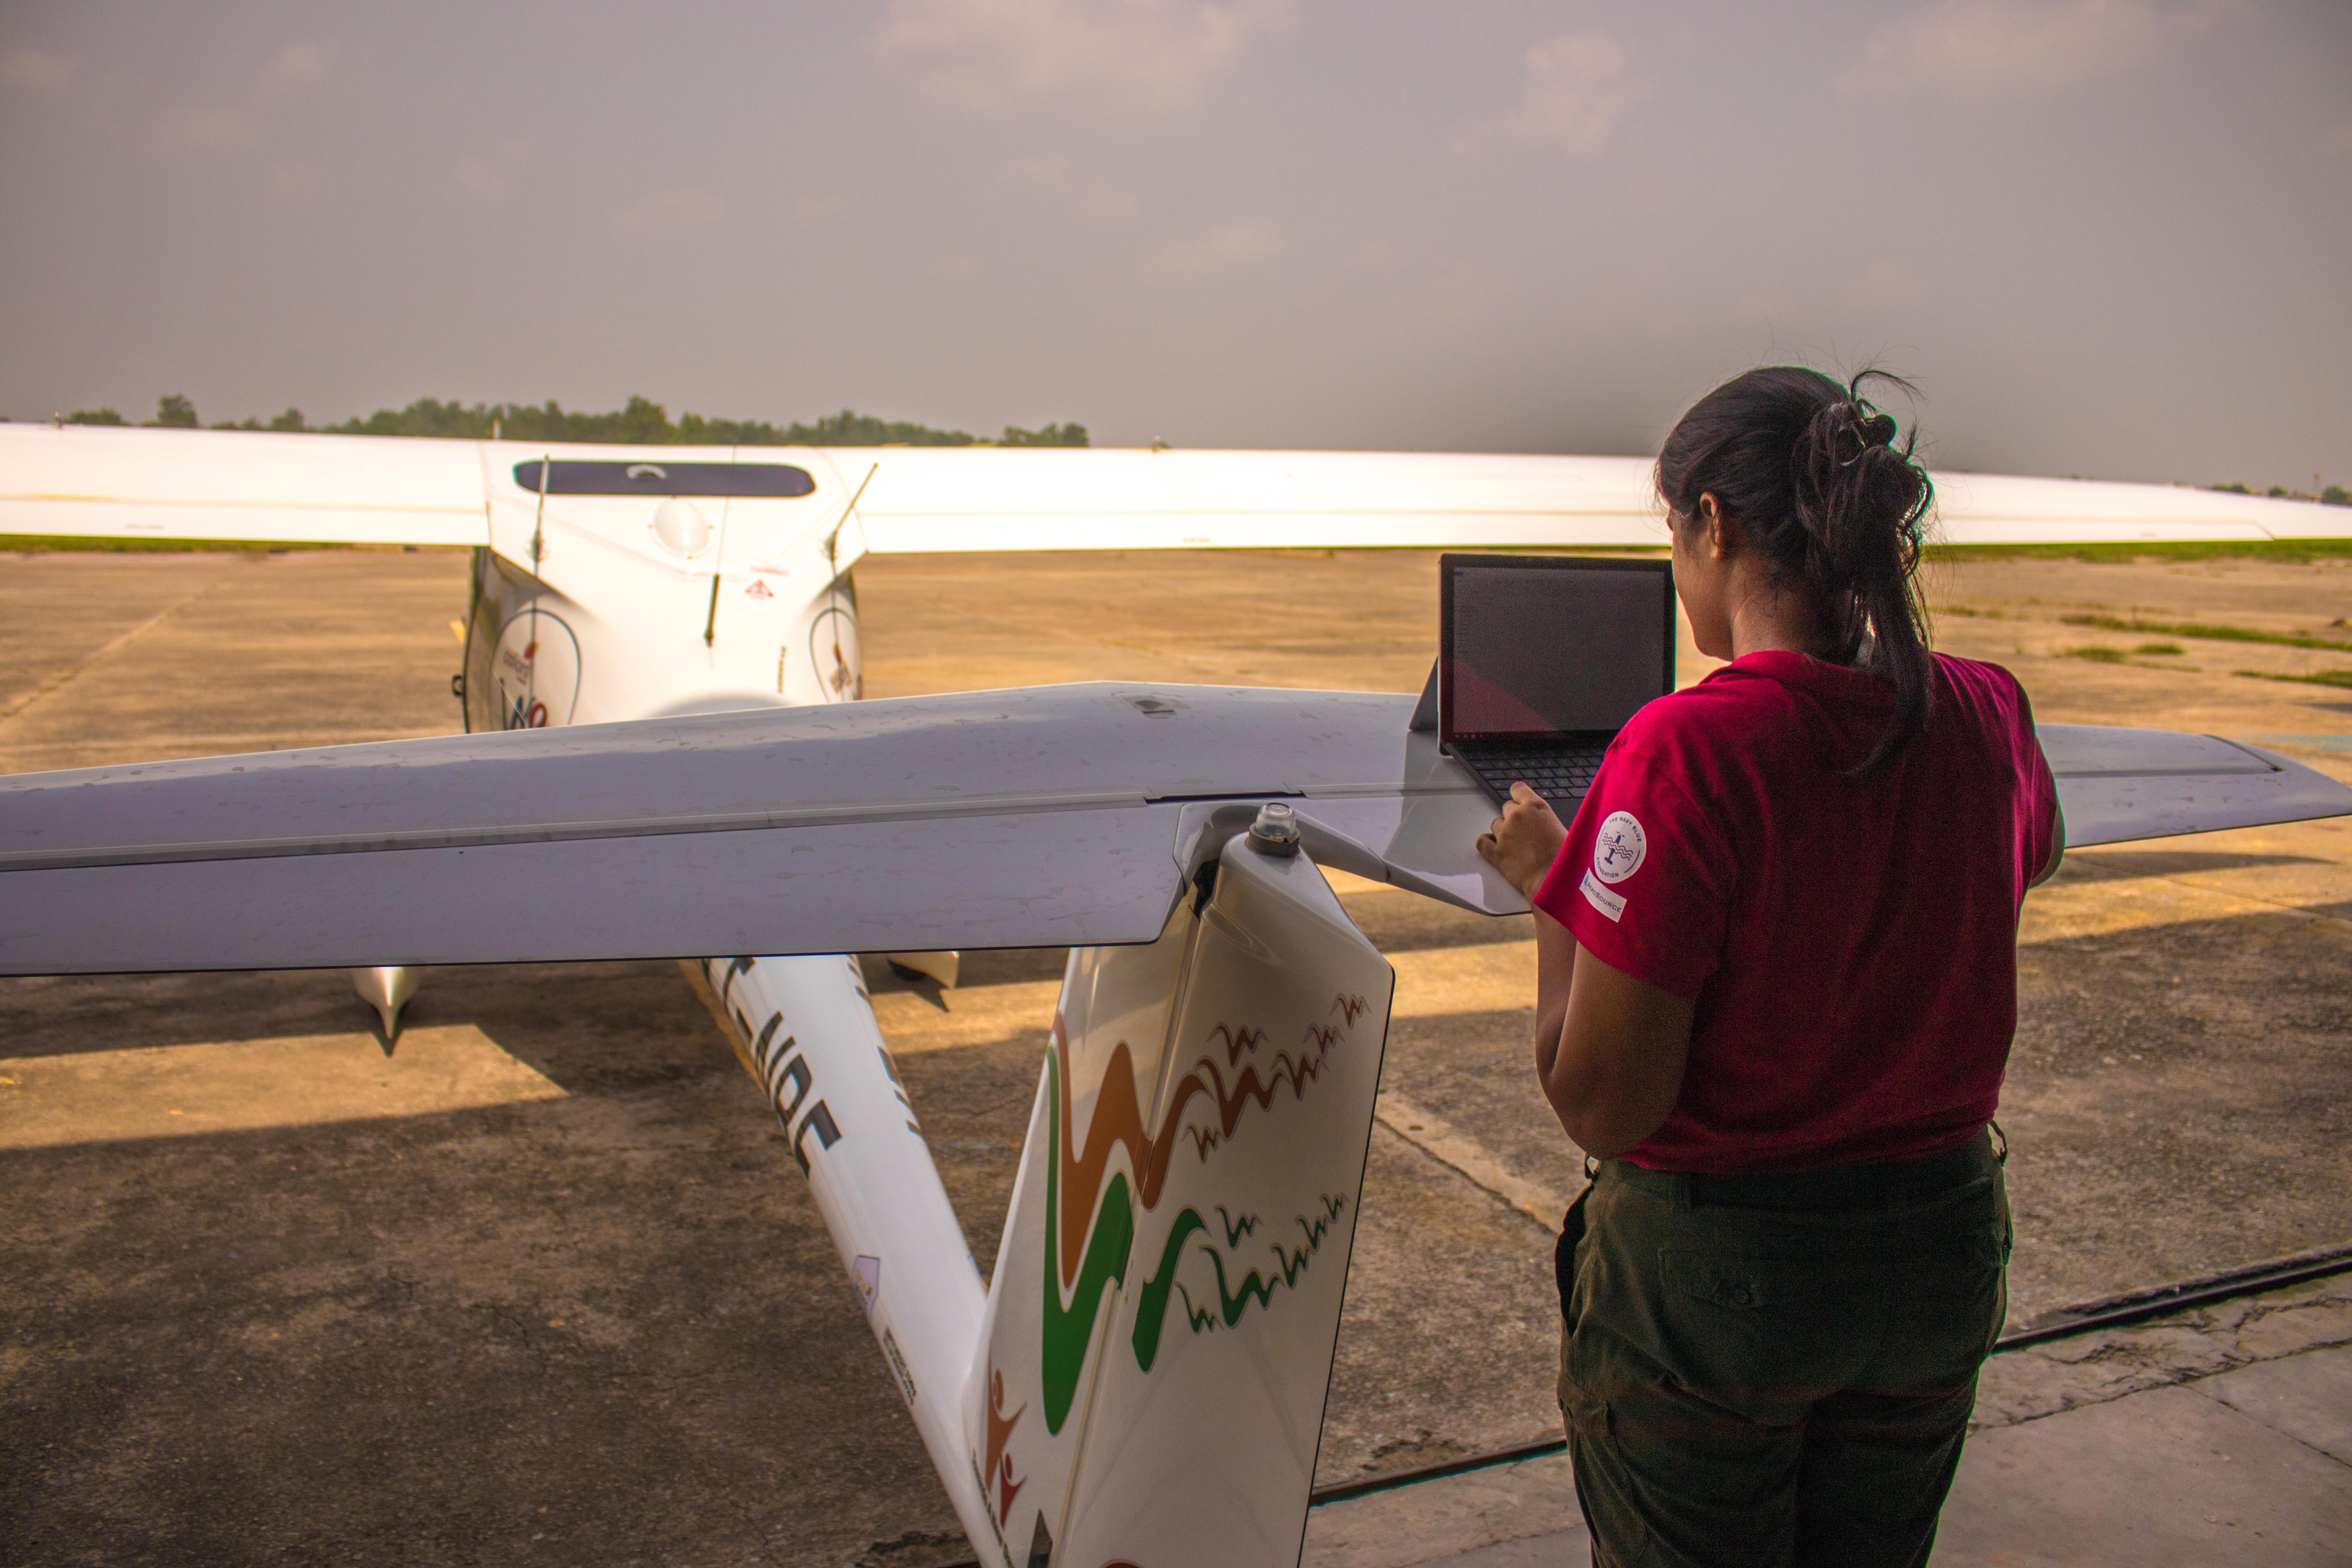 Aarohi Pandit works on the Surface on the rear wing of the motorglider